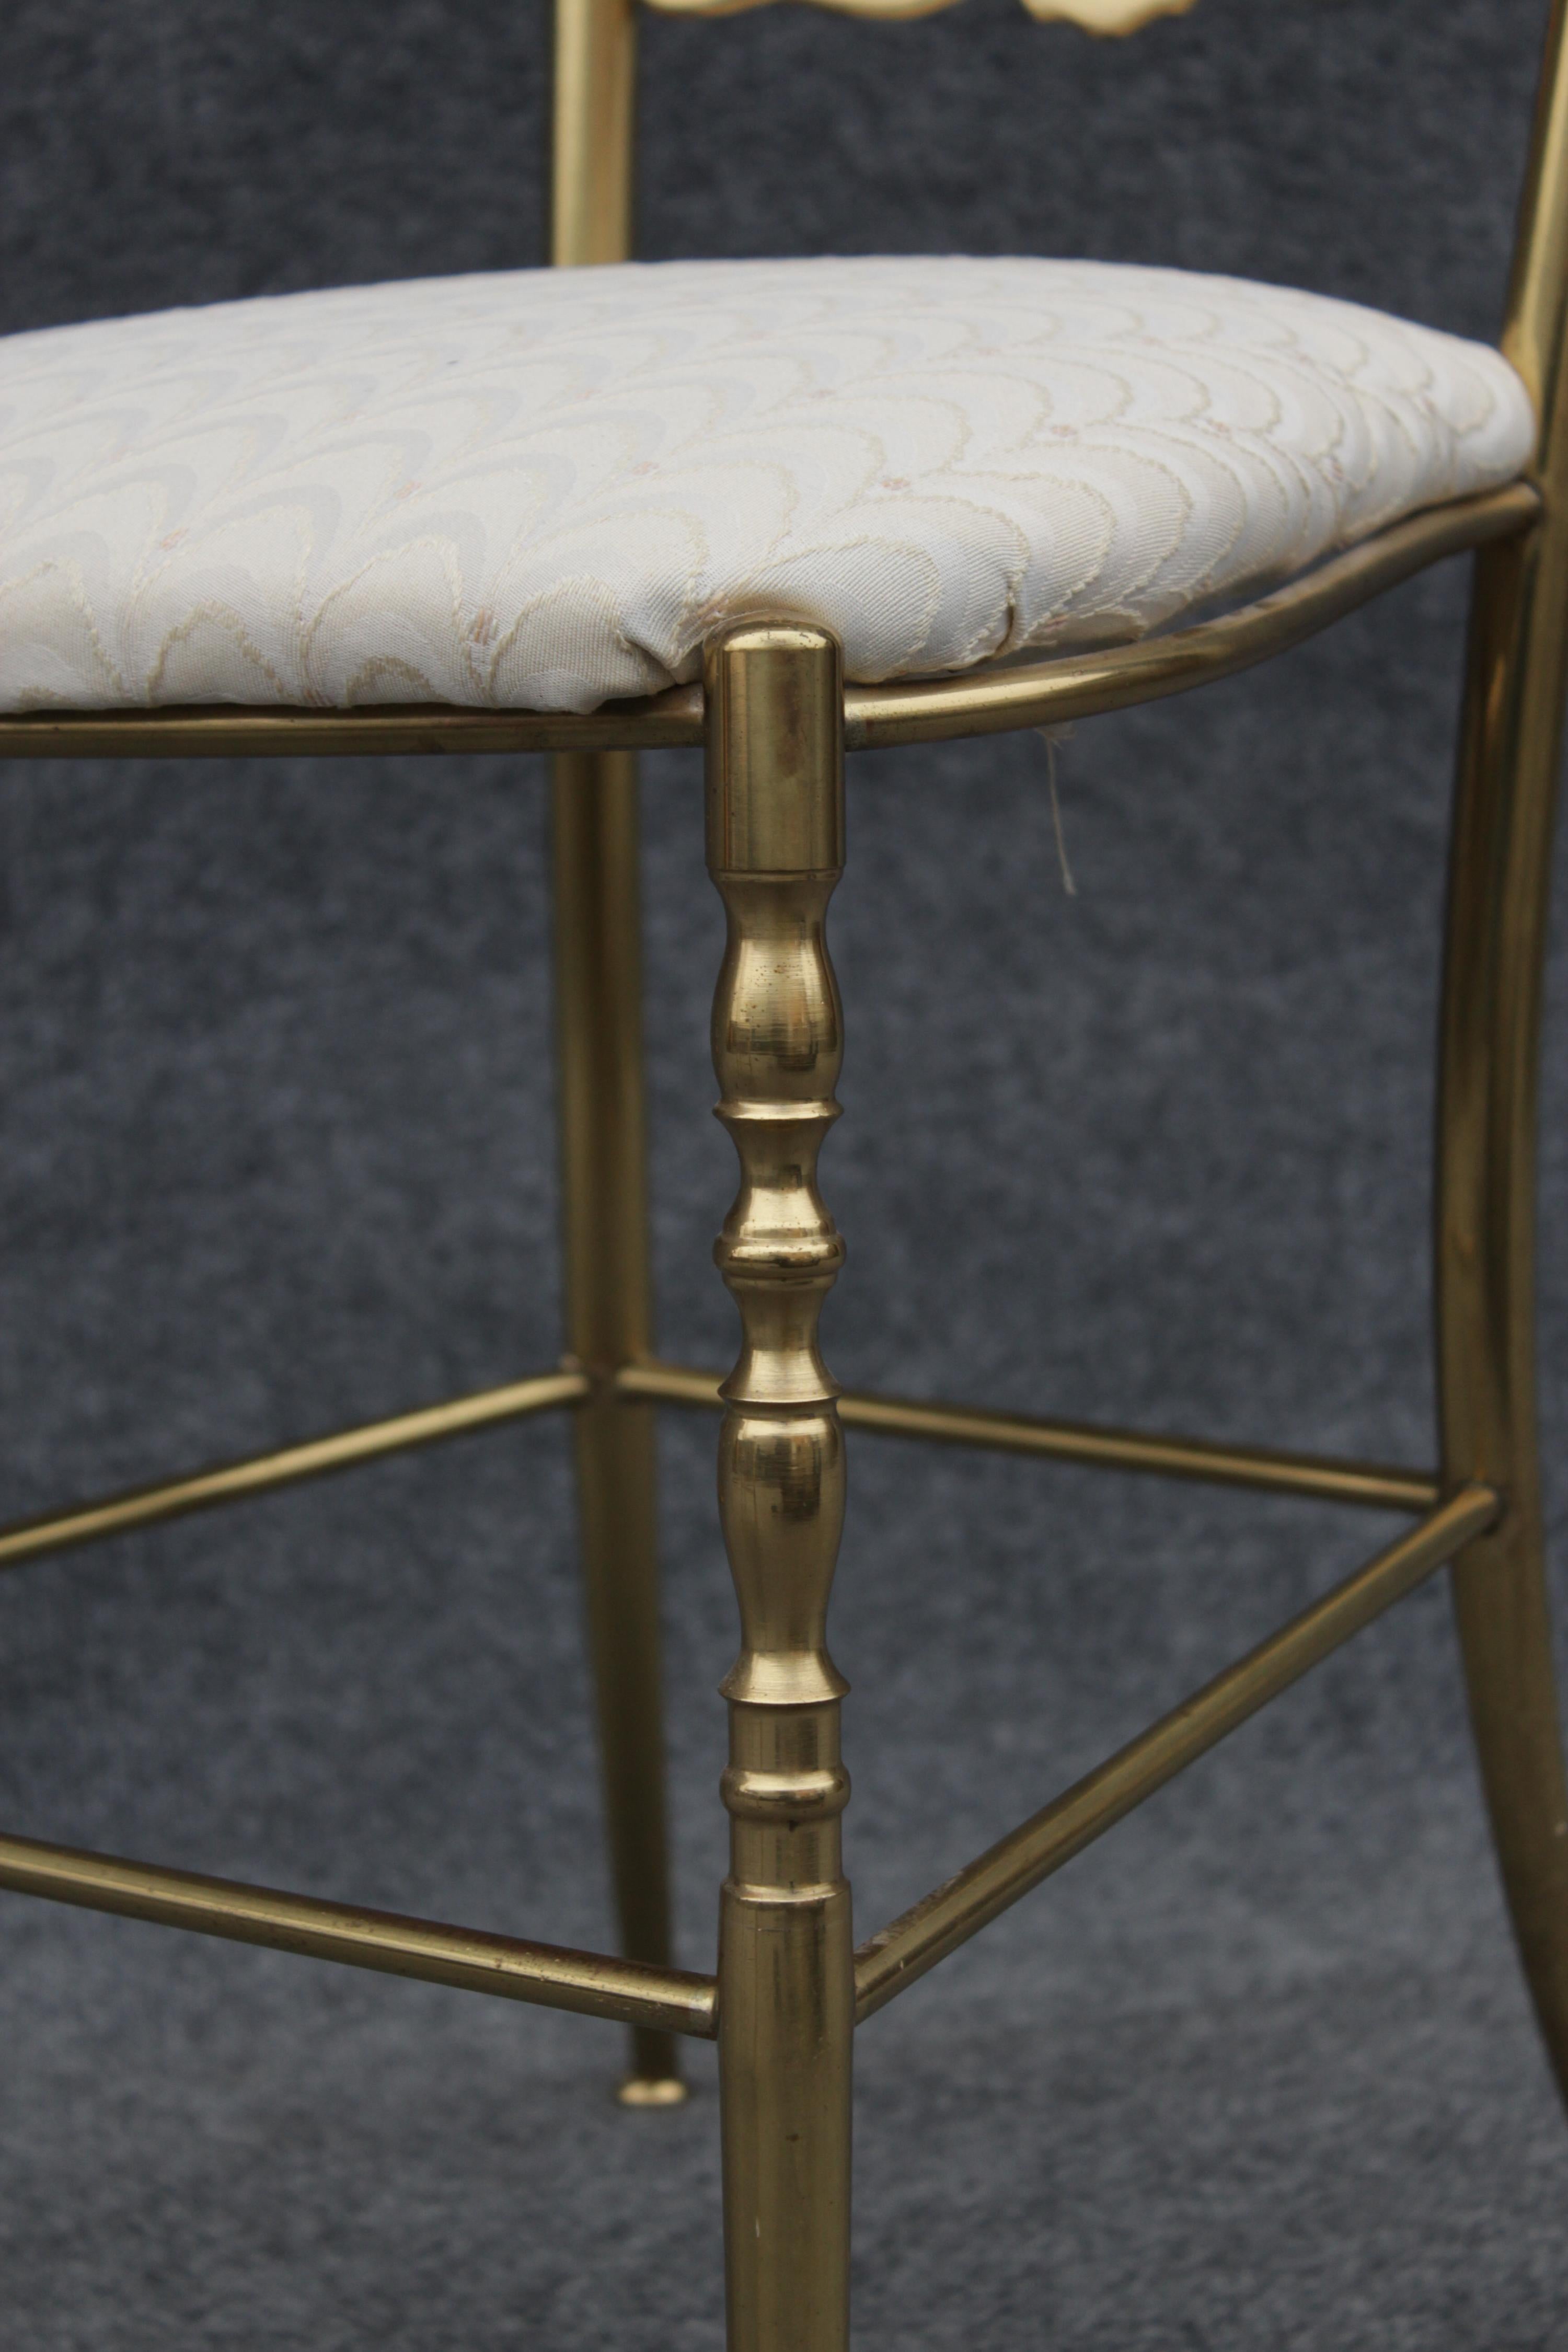 Pair of Solid Brass & White Upholstered Dining or Side Chairs by Chiavari Italy For Sale 10